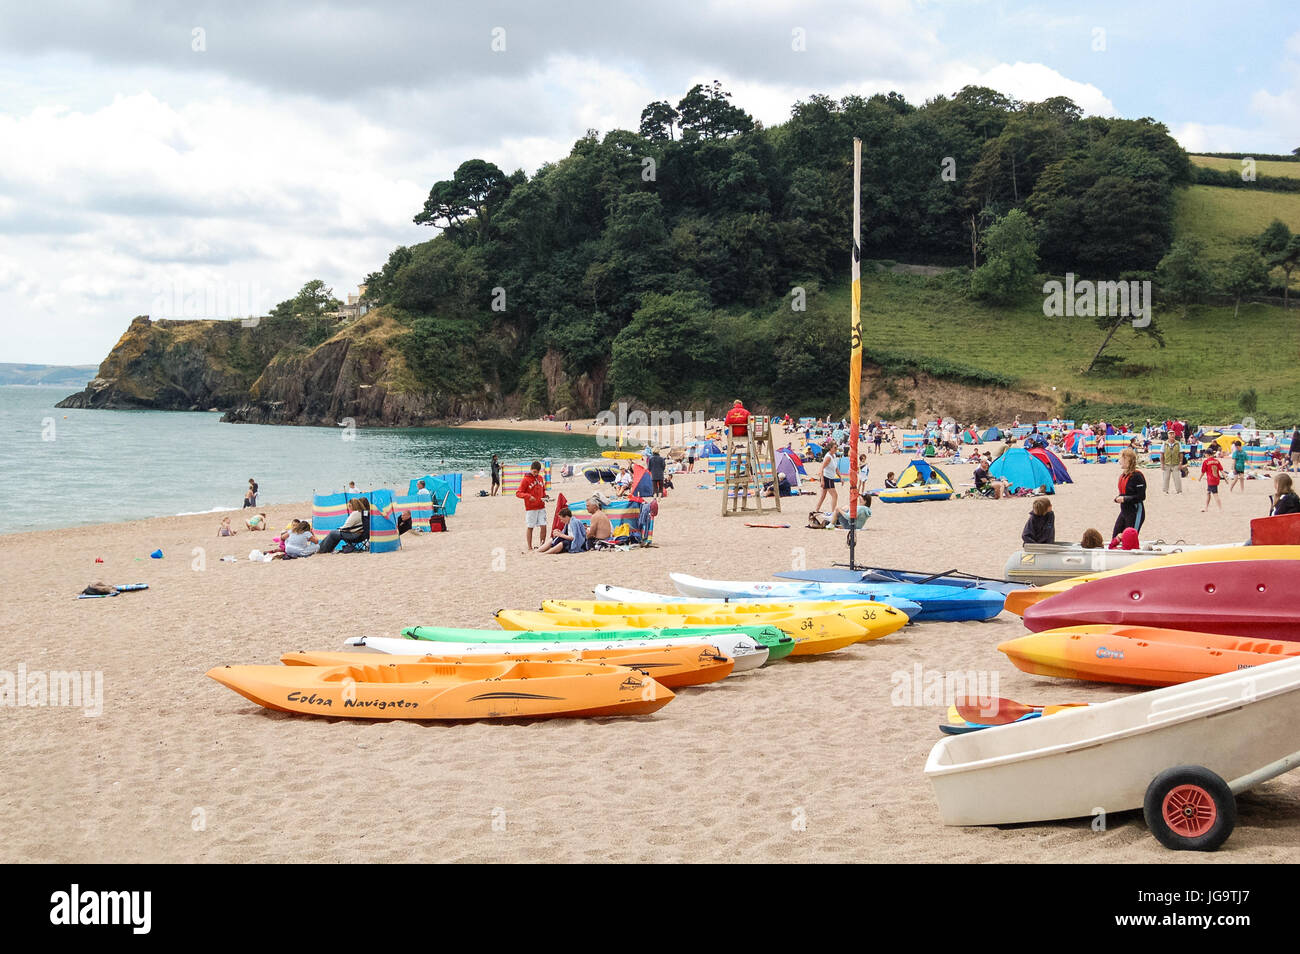 Boats and canoes on Blackpool Sands beach at Dartmouth in South Deon, UK. Stock Photo